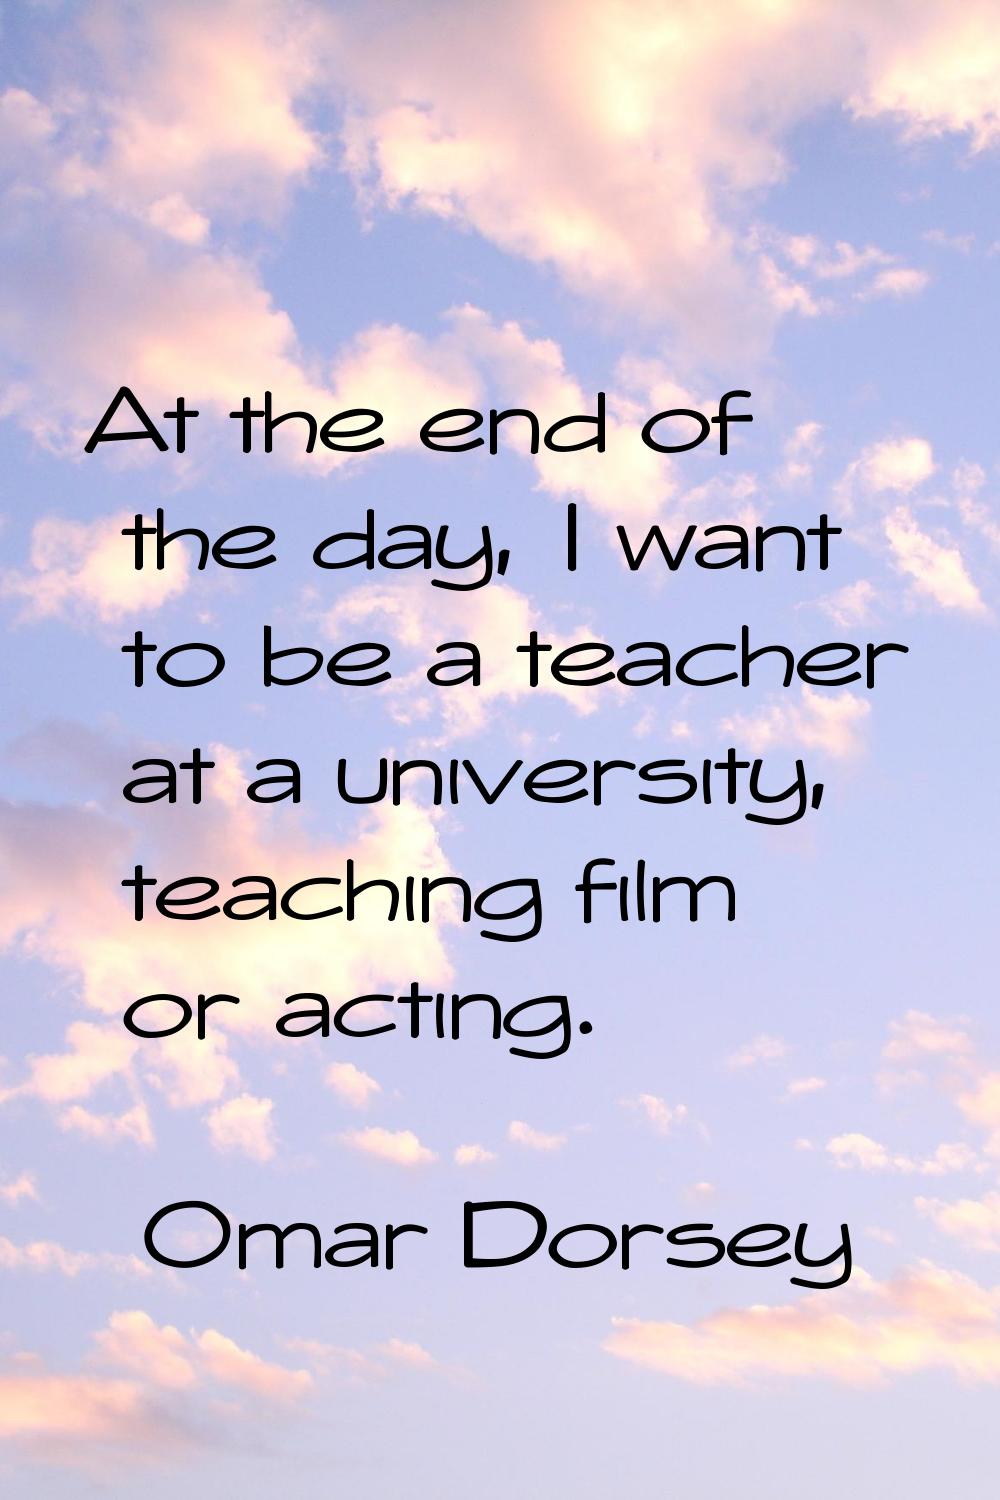 At the end of the day, I want to be a teacher at a university, teaching film or acting.